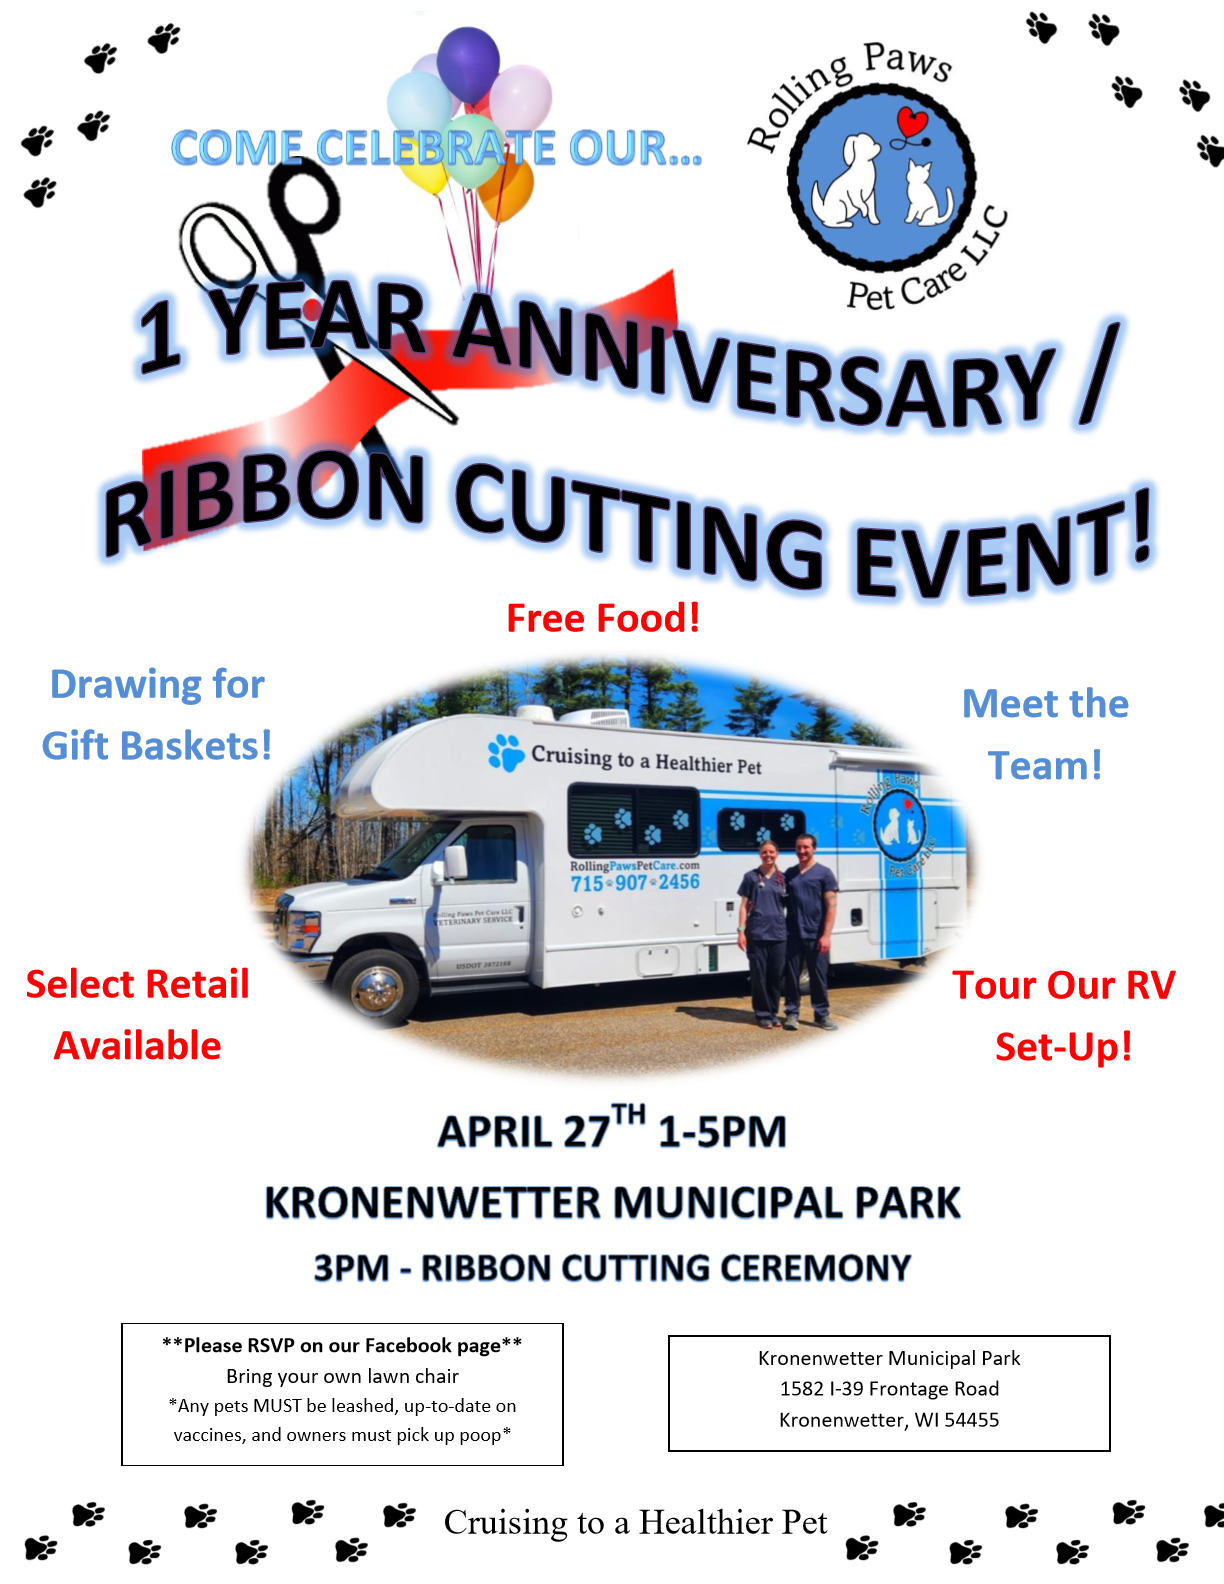 1 Year Anniversary Ribbon Cutting Ceremony Flyer FINAL